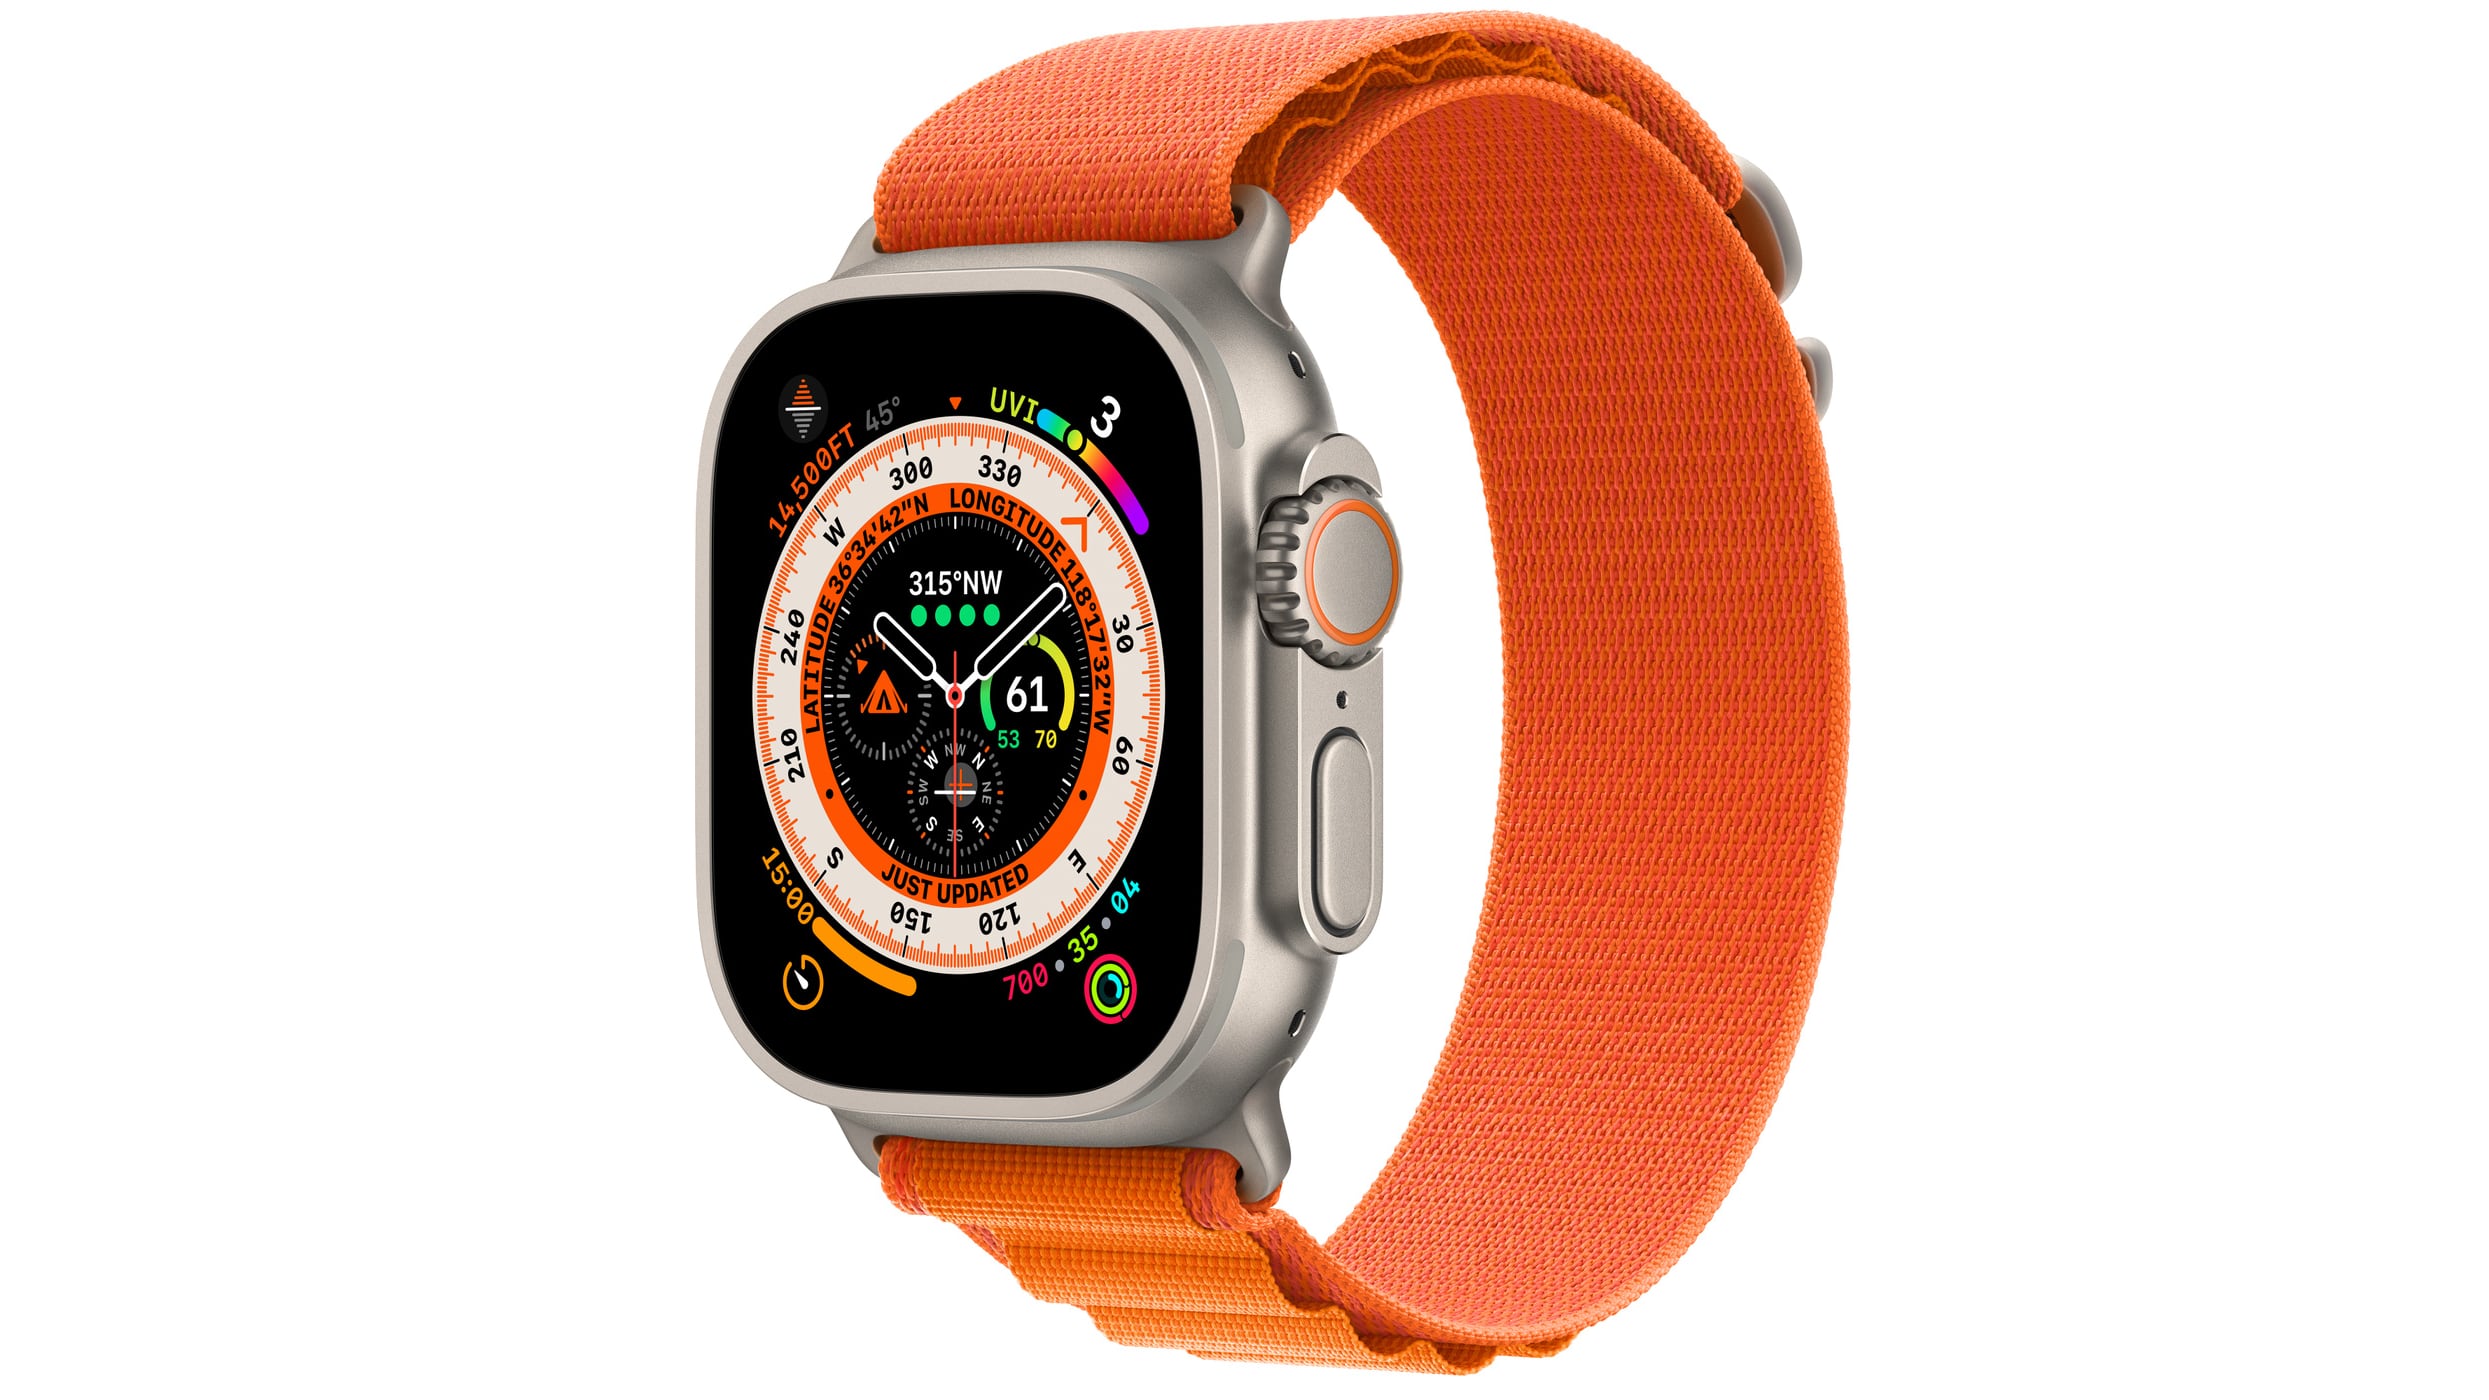 Apple Watch Ultra Will Get Up to 60 Hours of Battery Life With Software Update Later This Year